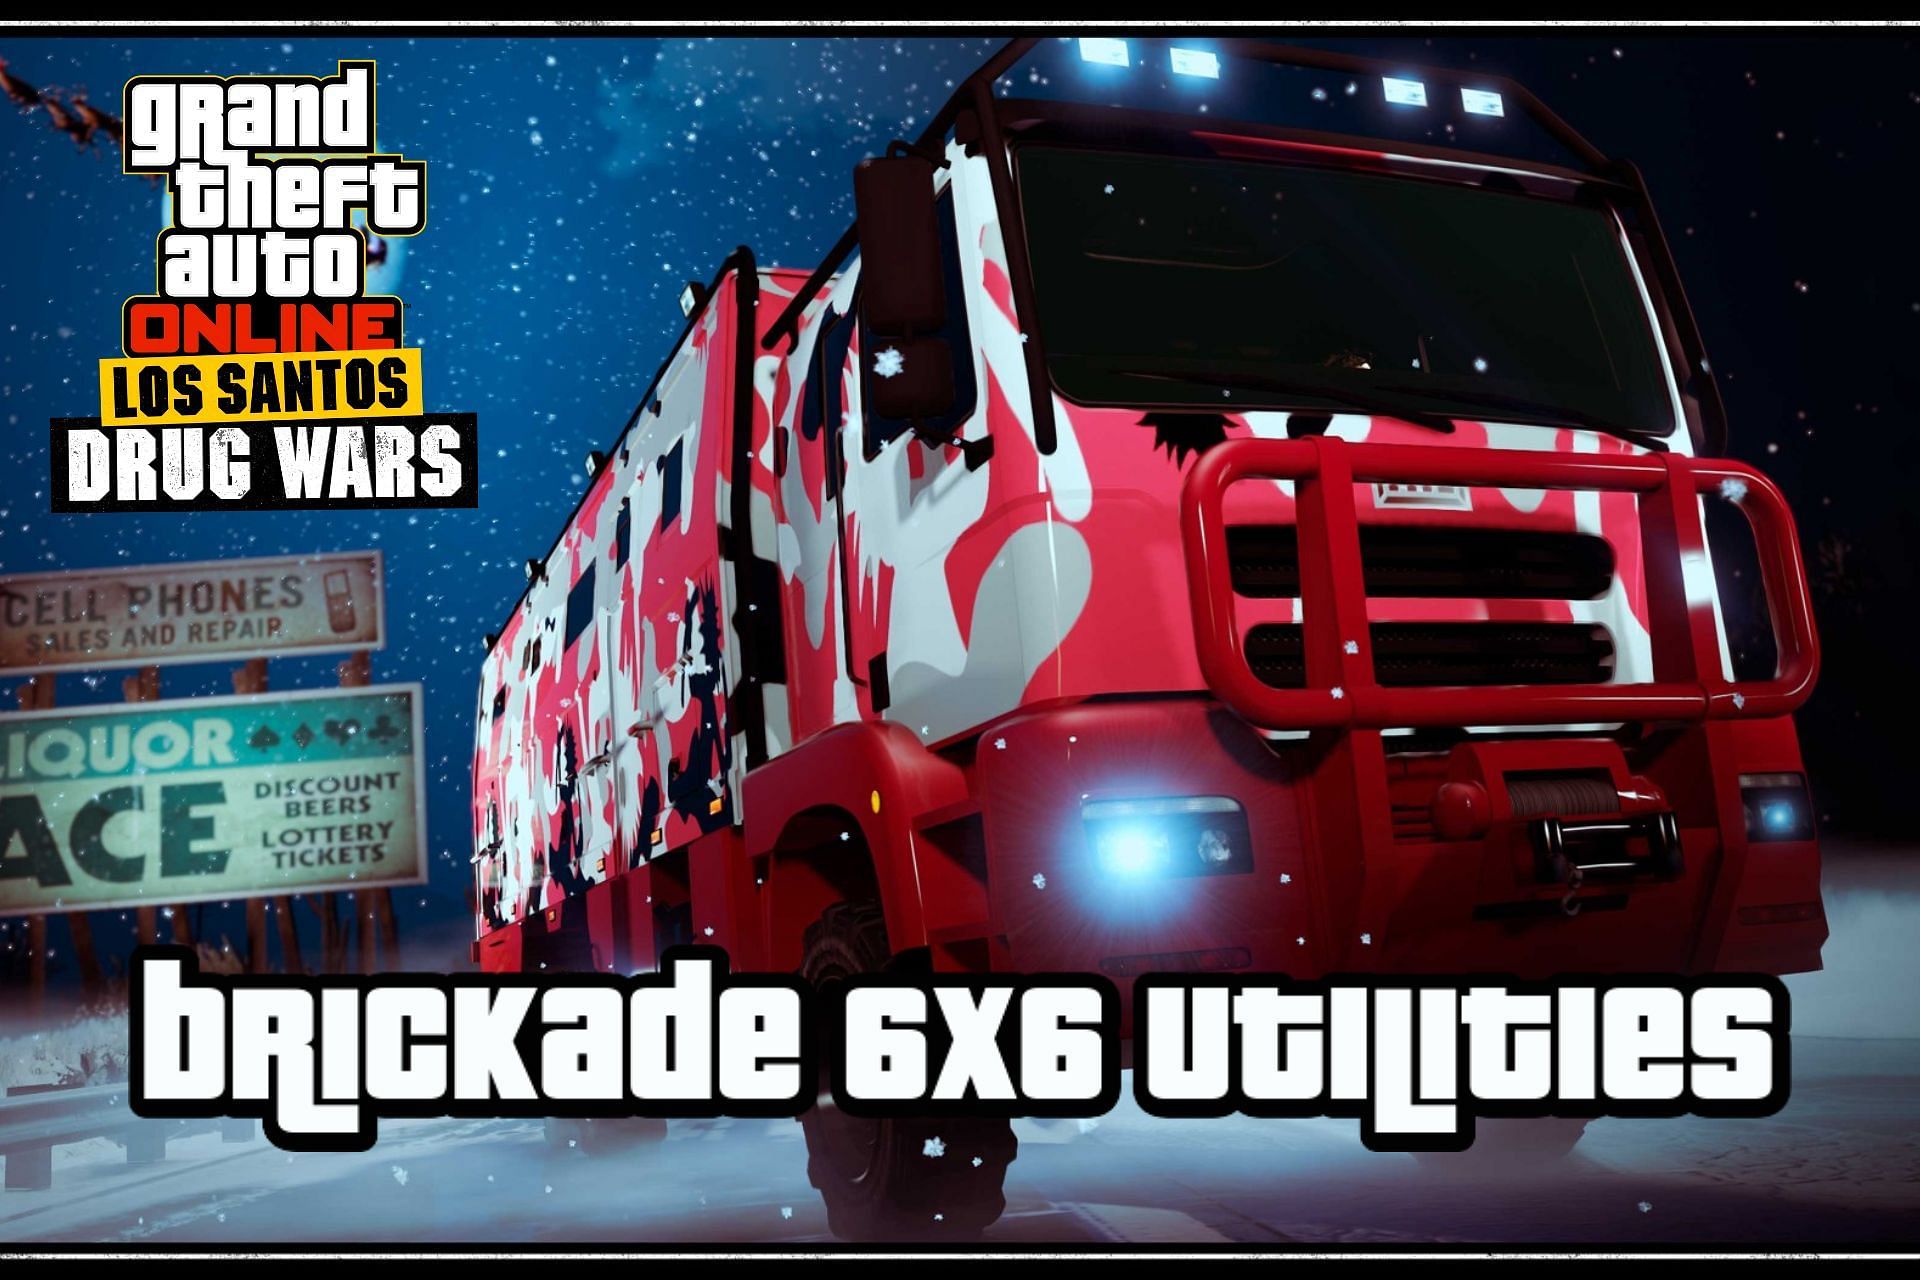 The Brickade 6x6 is currently one of the must-have vehicles in GTA Online (Image via Rockstar Games)